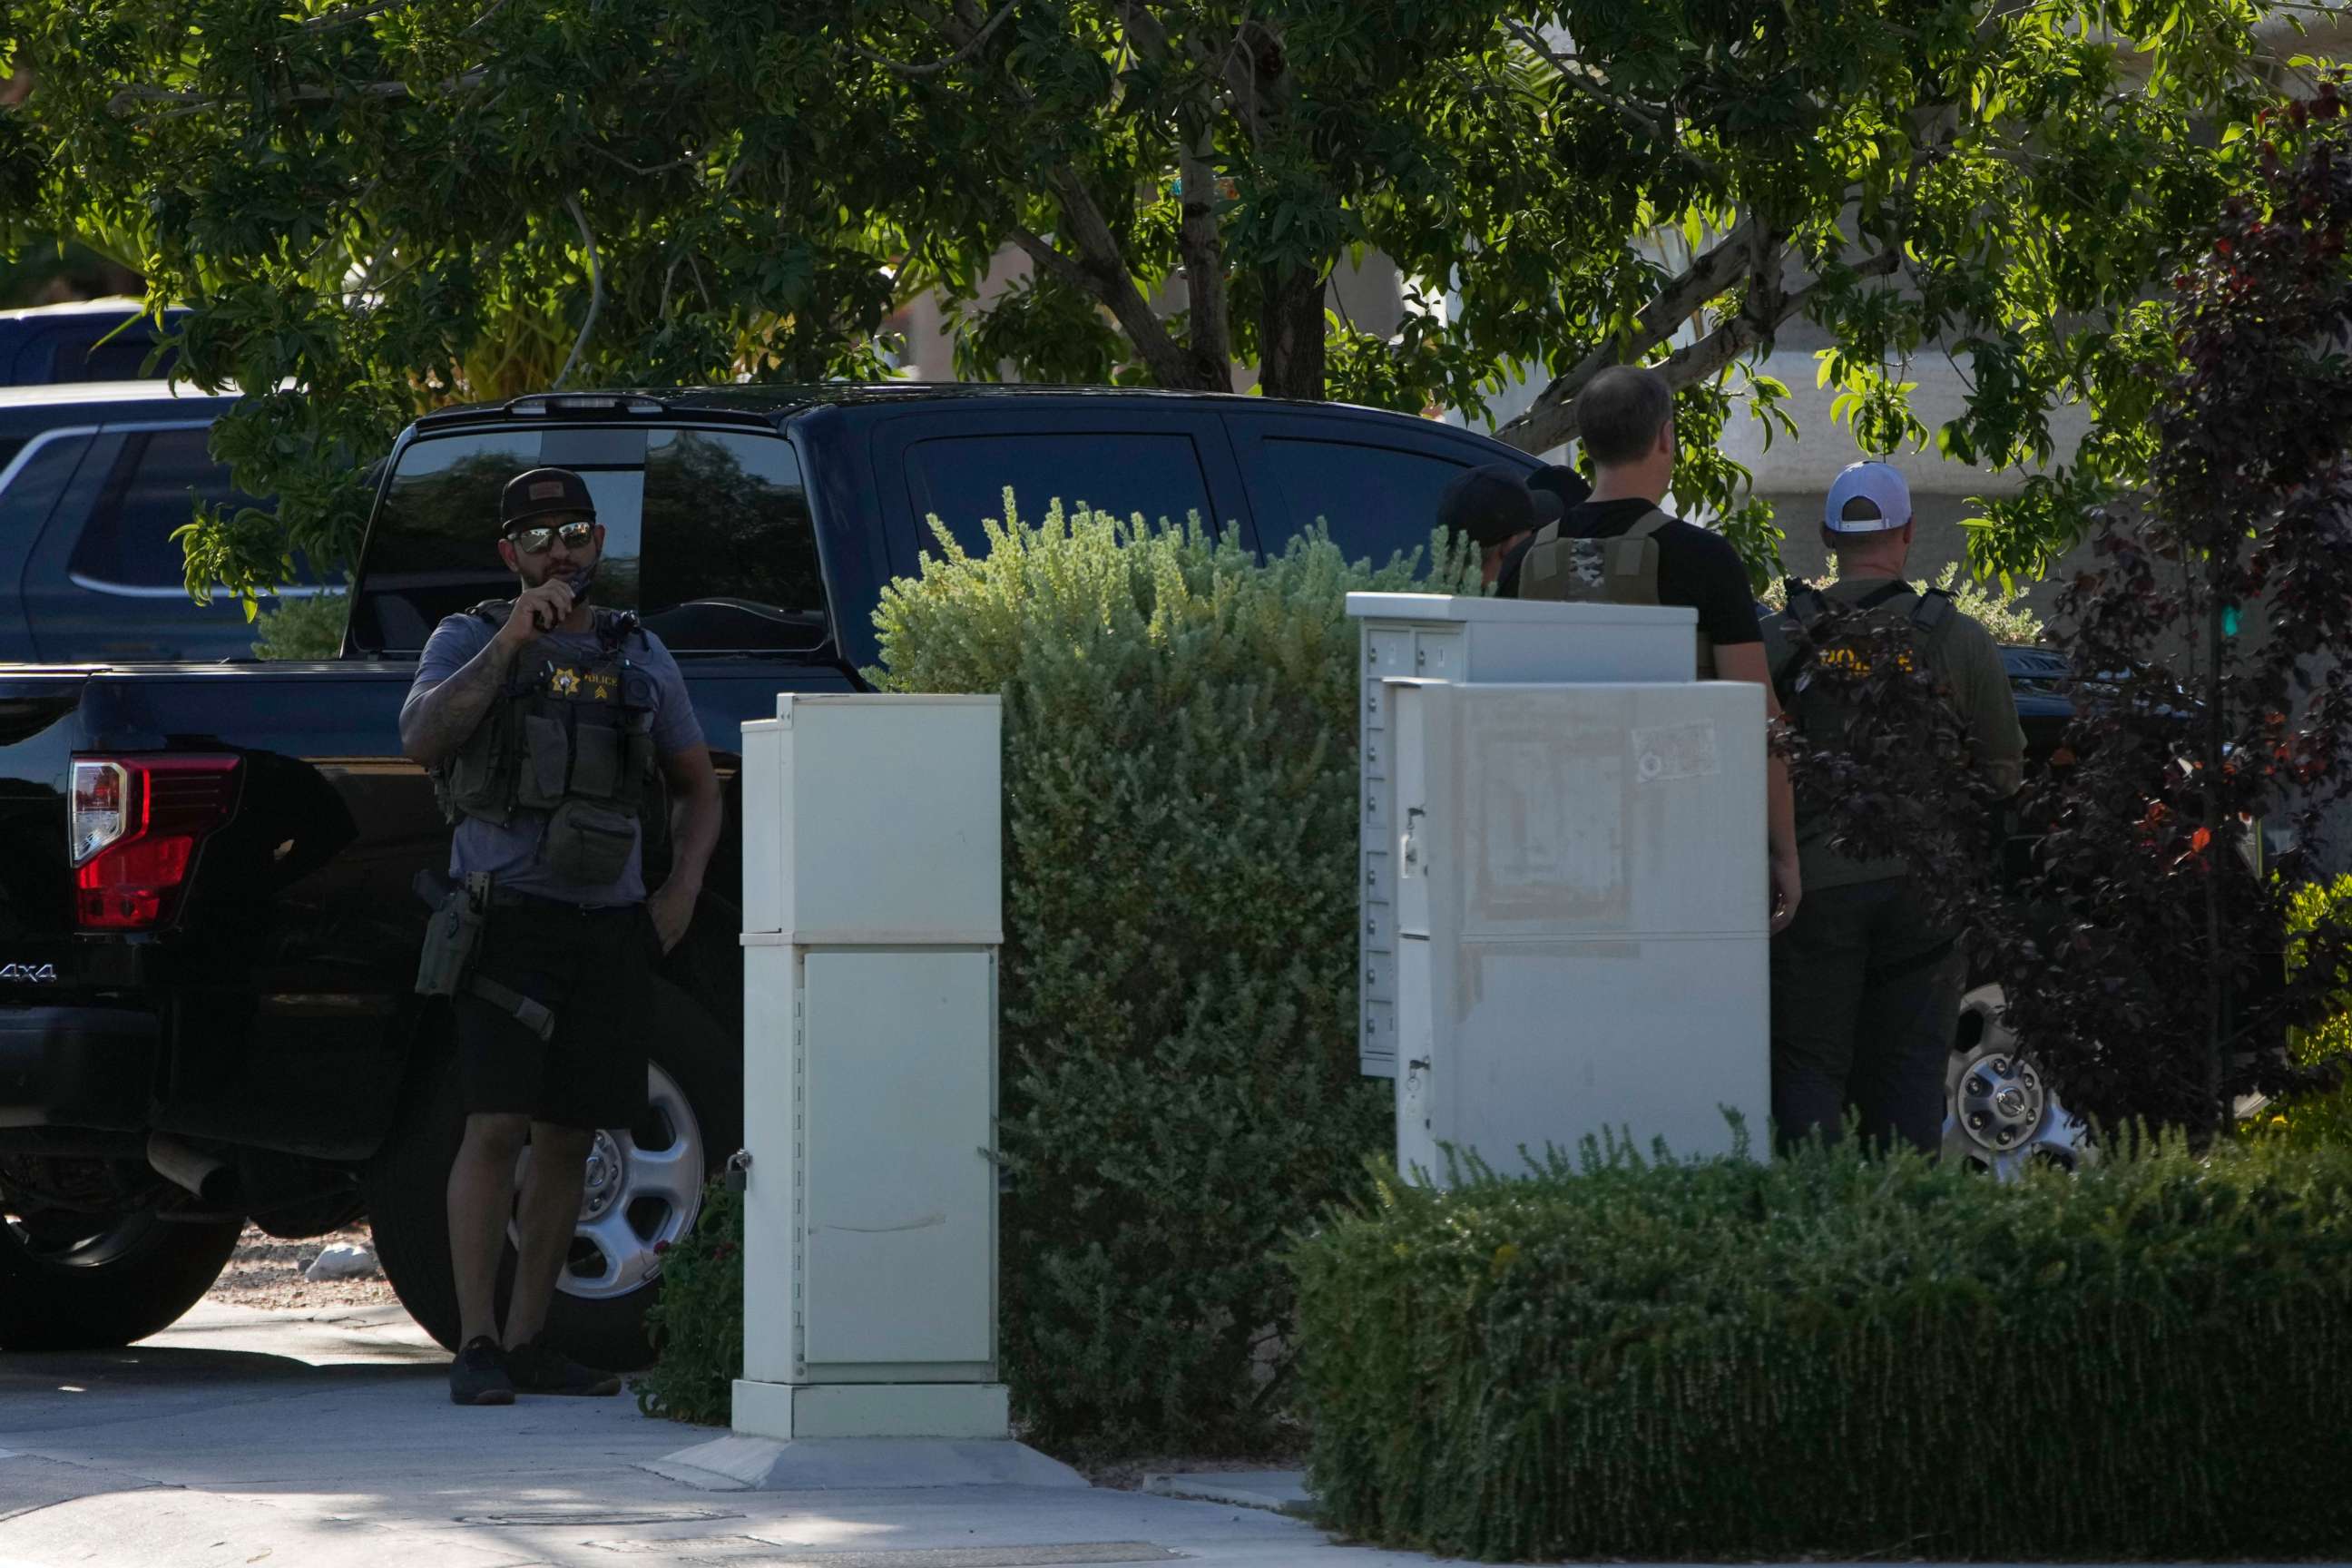 PHOTO: Police take positions around the house of Clark County Public Administrator Robert Telles, Wednesday, Sept. 7. Authorities served search warrants at Telles' home earlier in connection with the fatal stabbing of investigative reporter Jeff German.